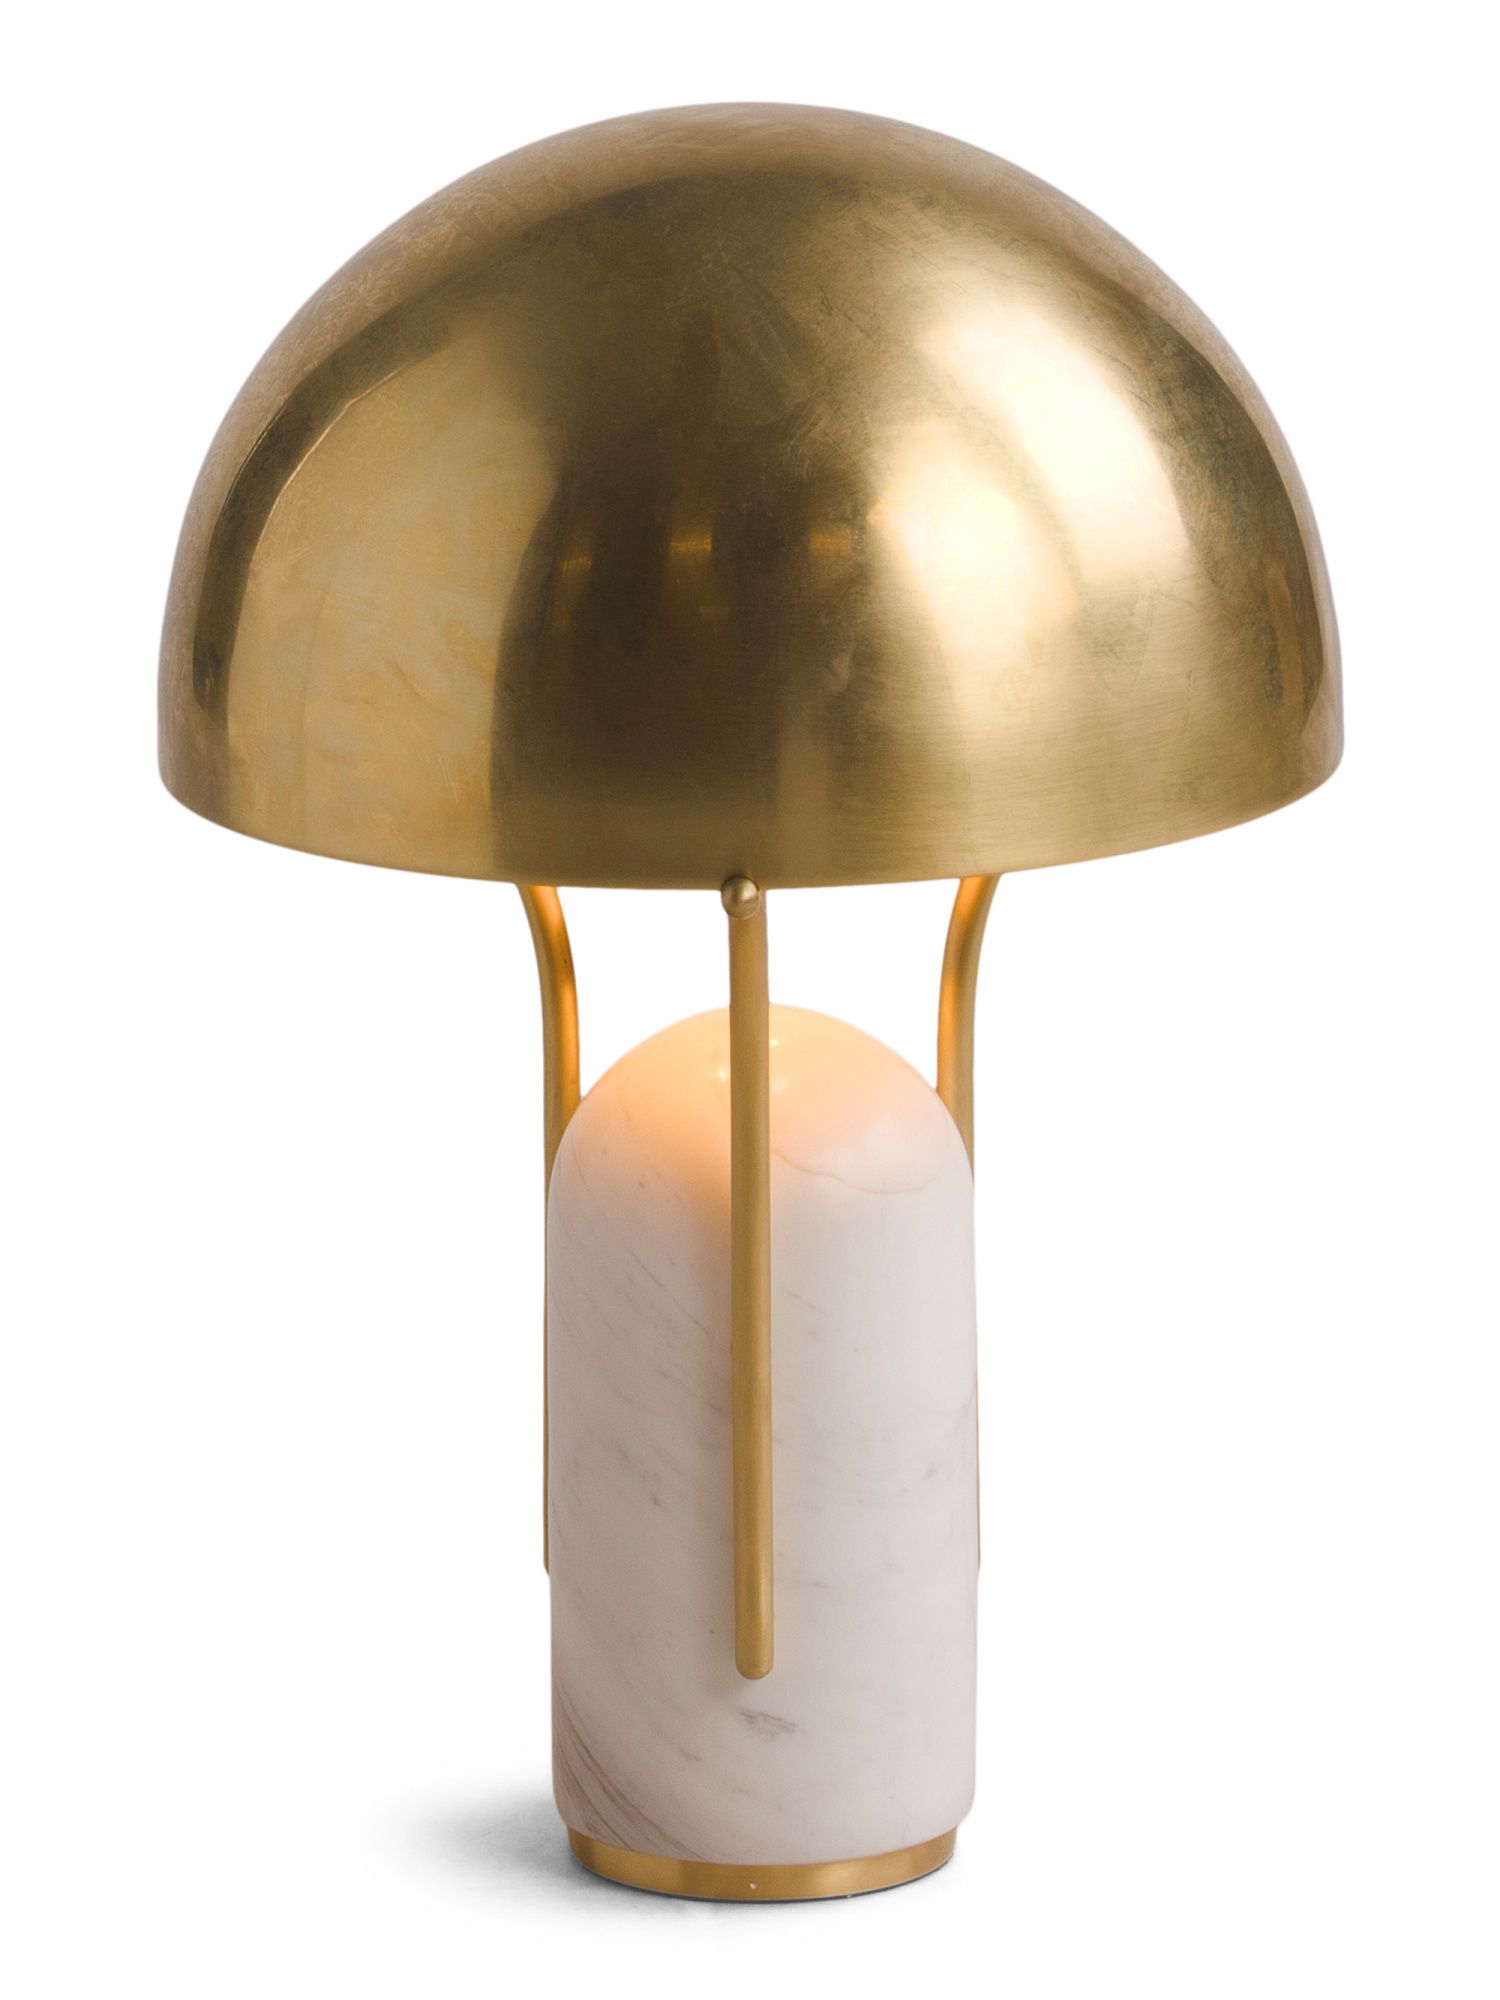 22in Marble Metal Affinity Dome Table Lamp | TJ Maxx